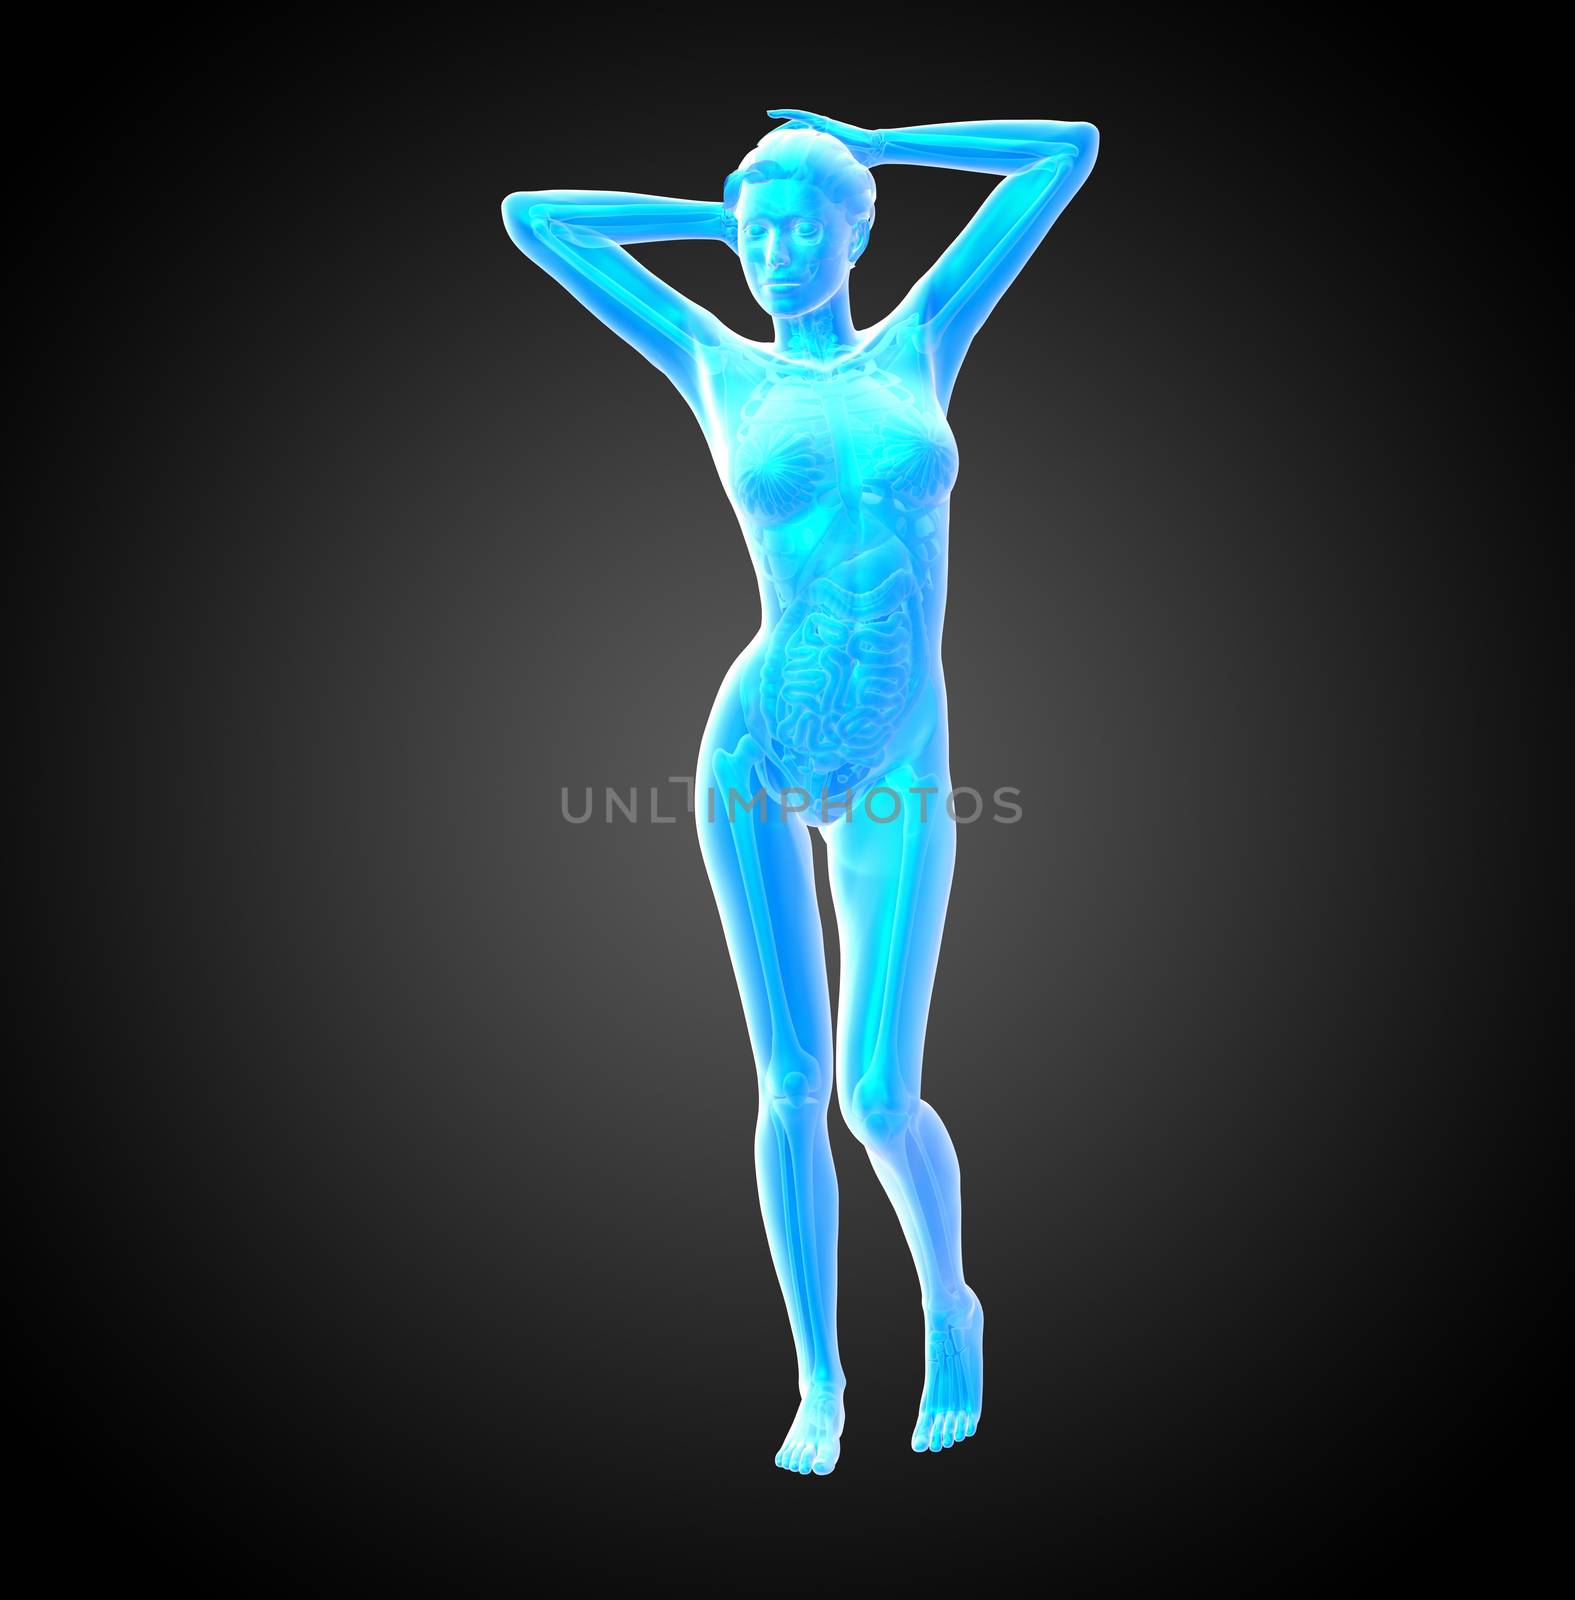 3d render illustration of the human anatomy - front view